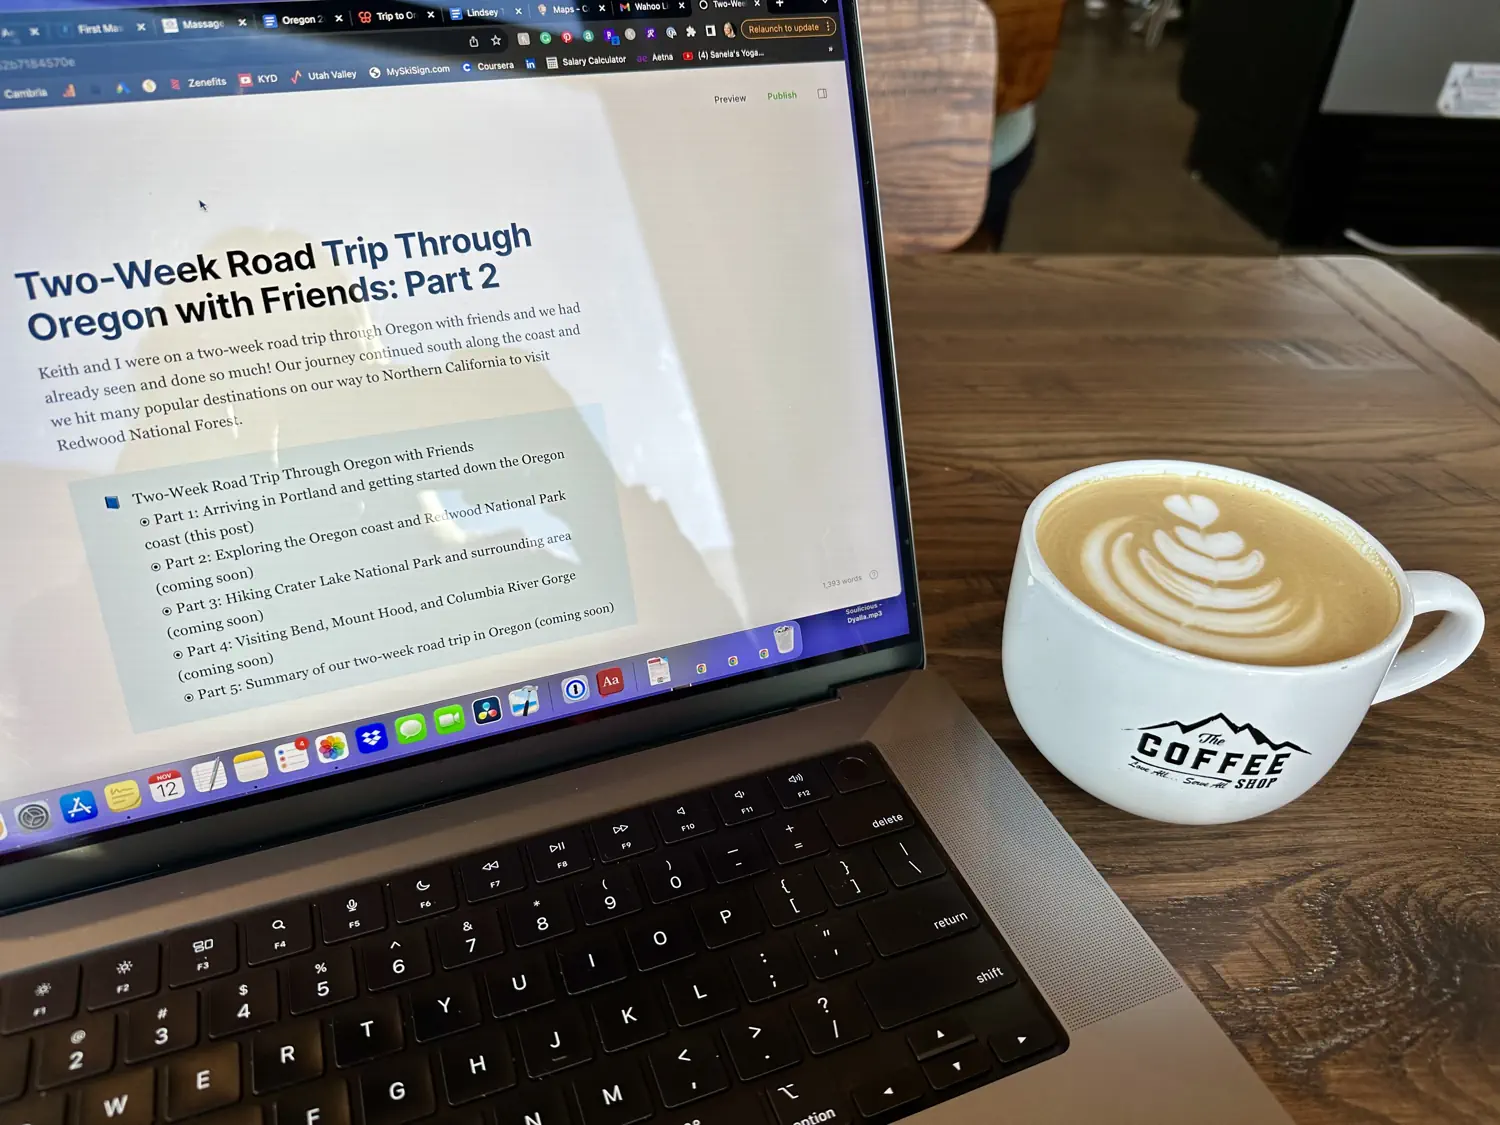 Lindsey is working on a blog post from The Coffee Shop in American Fork, UT